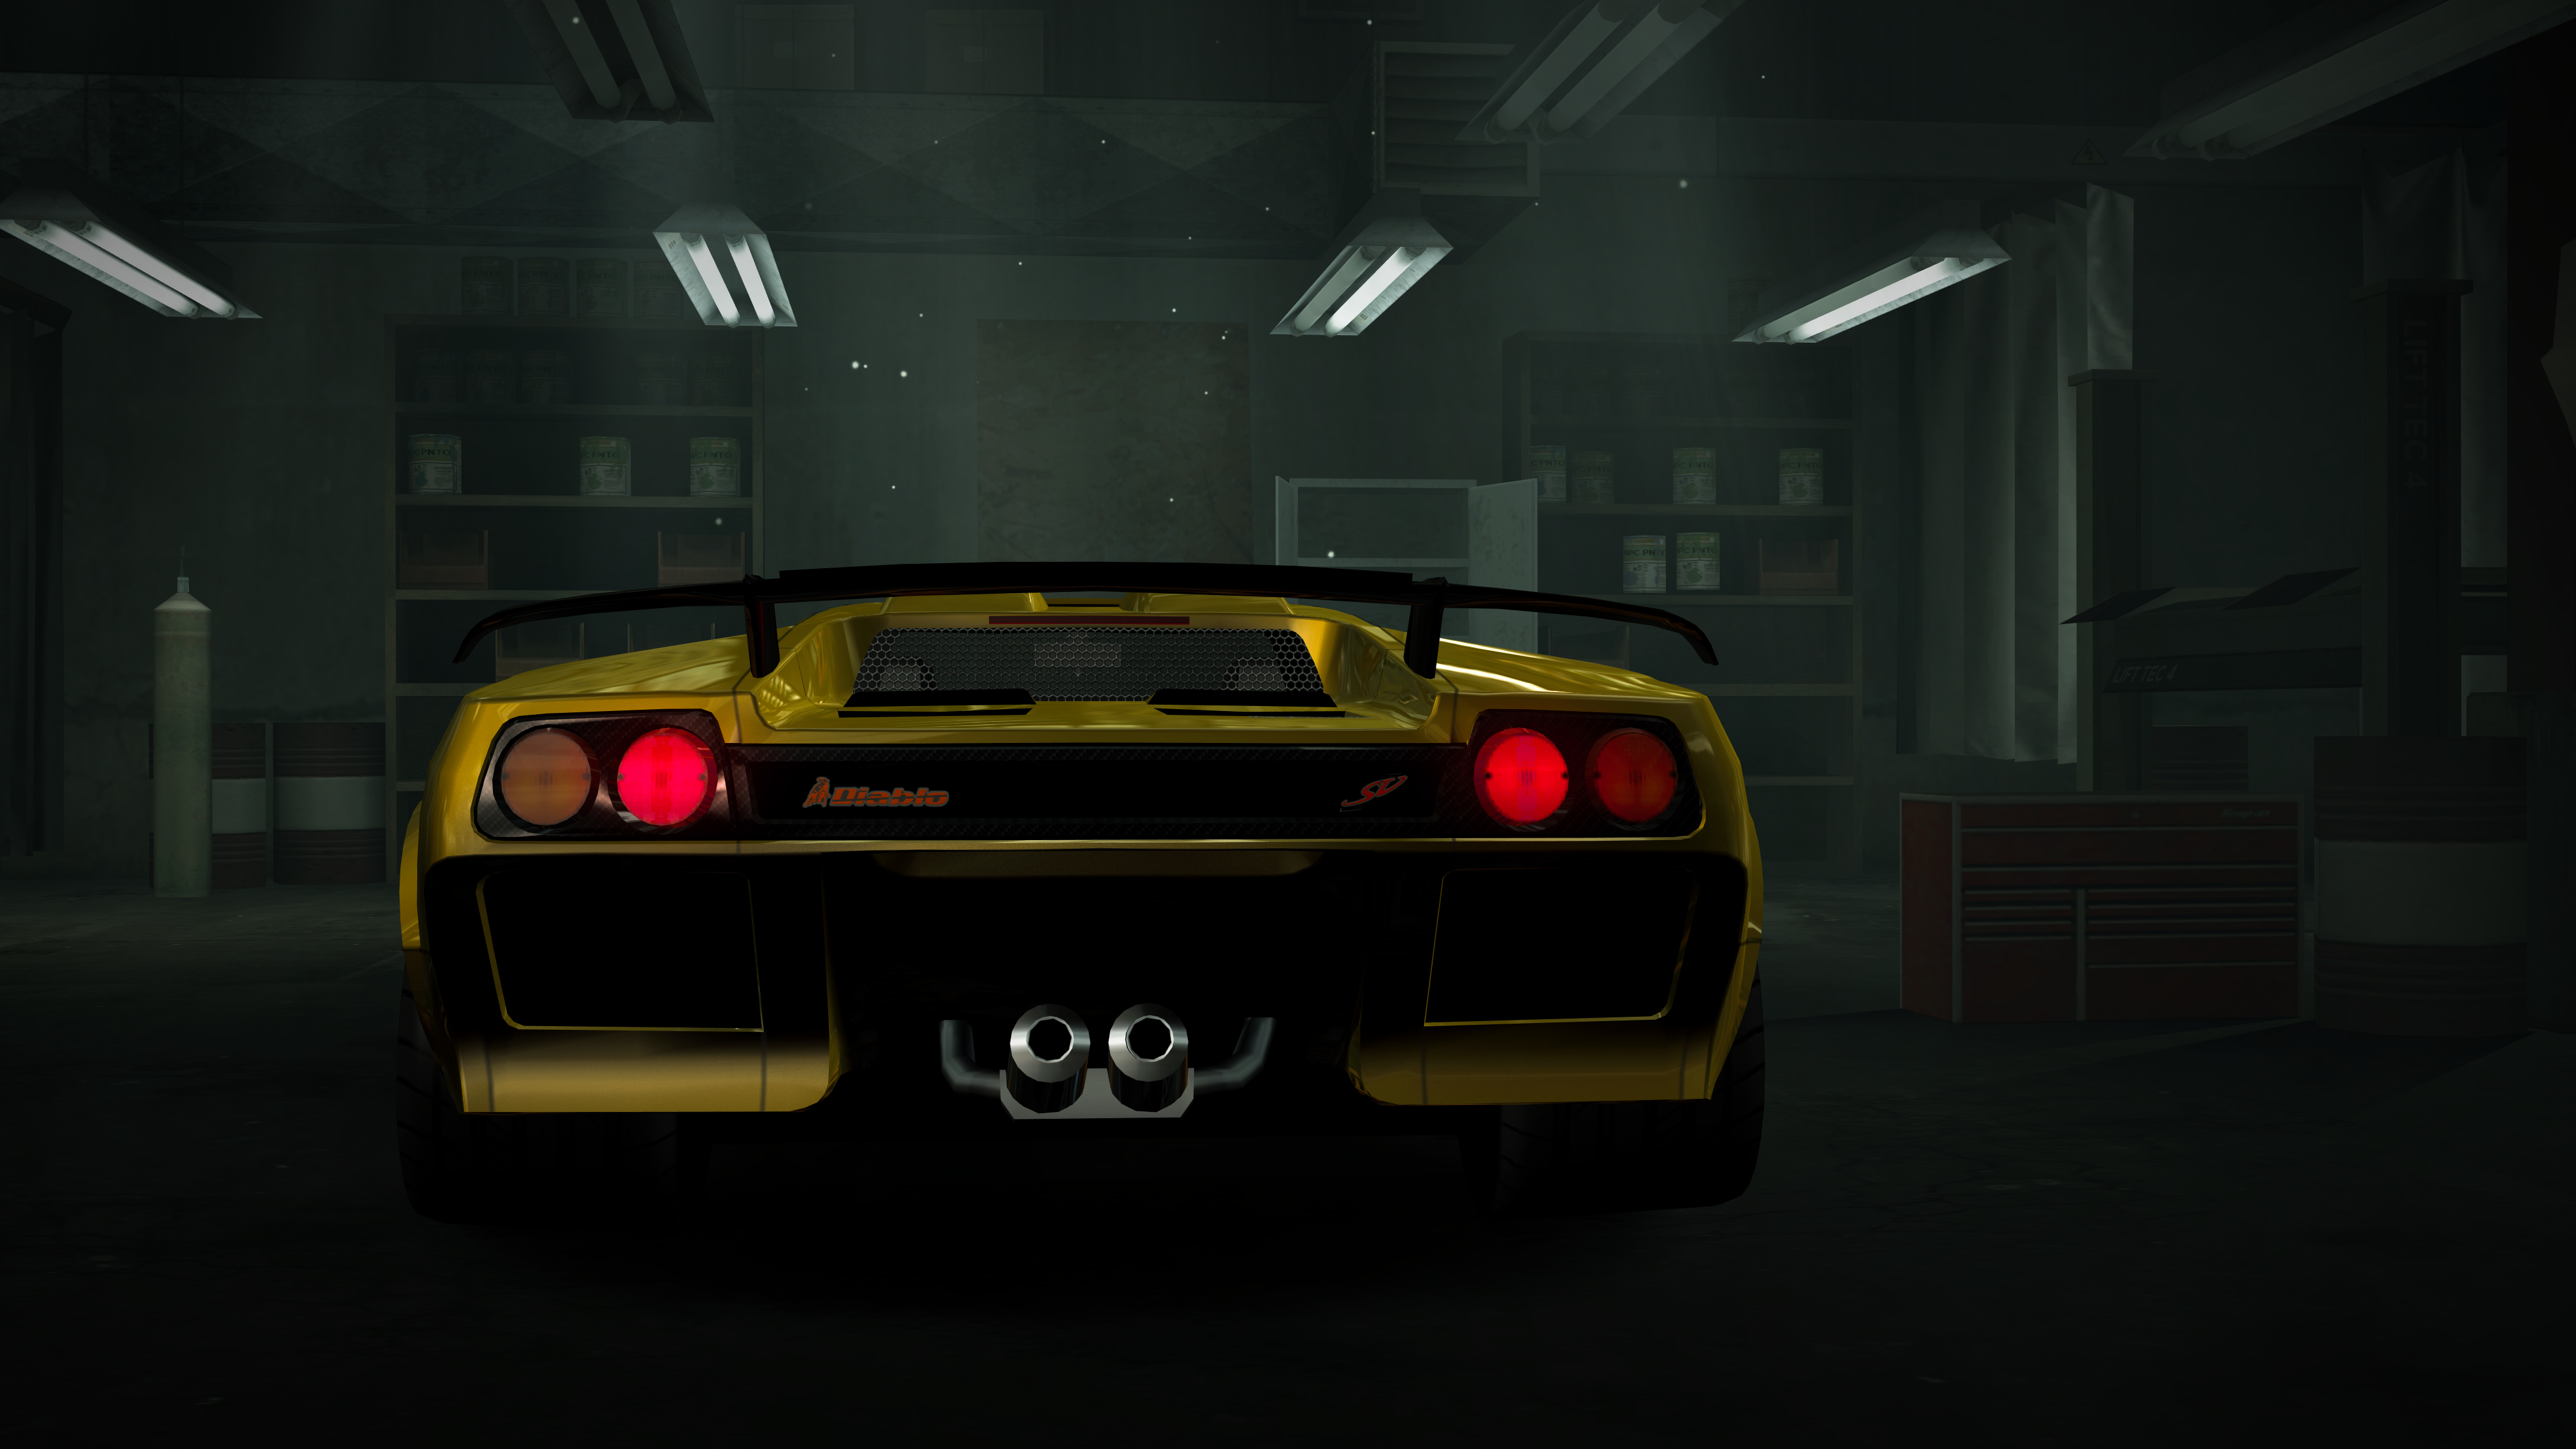 Lamborghini Diablo Garage Need For Speed Need For Speed World Car Vehicle Video Games Rear View Tail 4112x2313